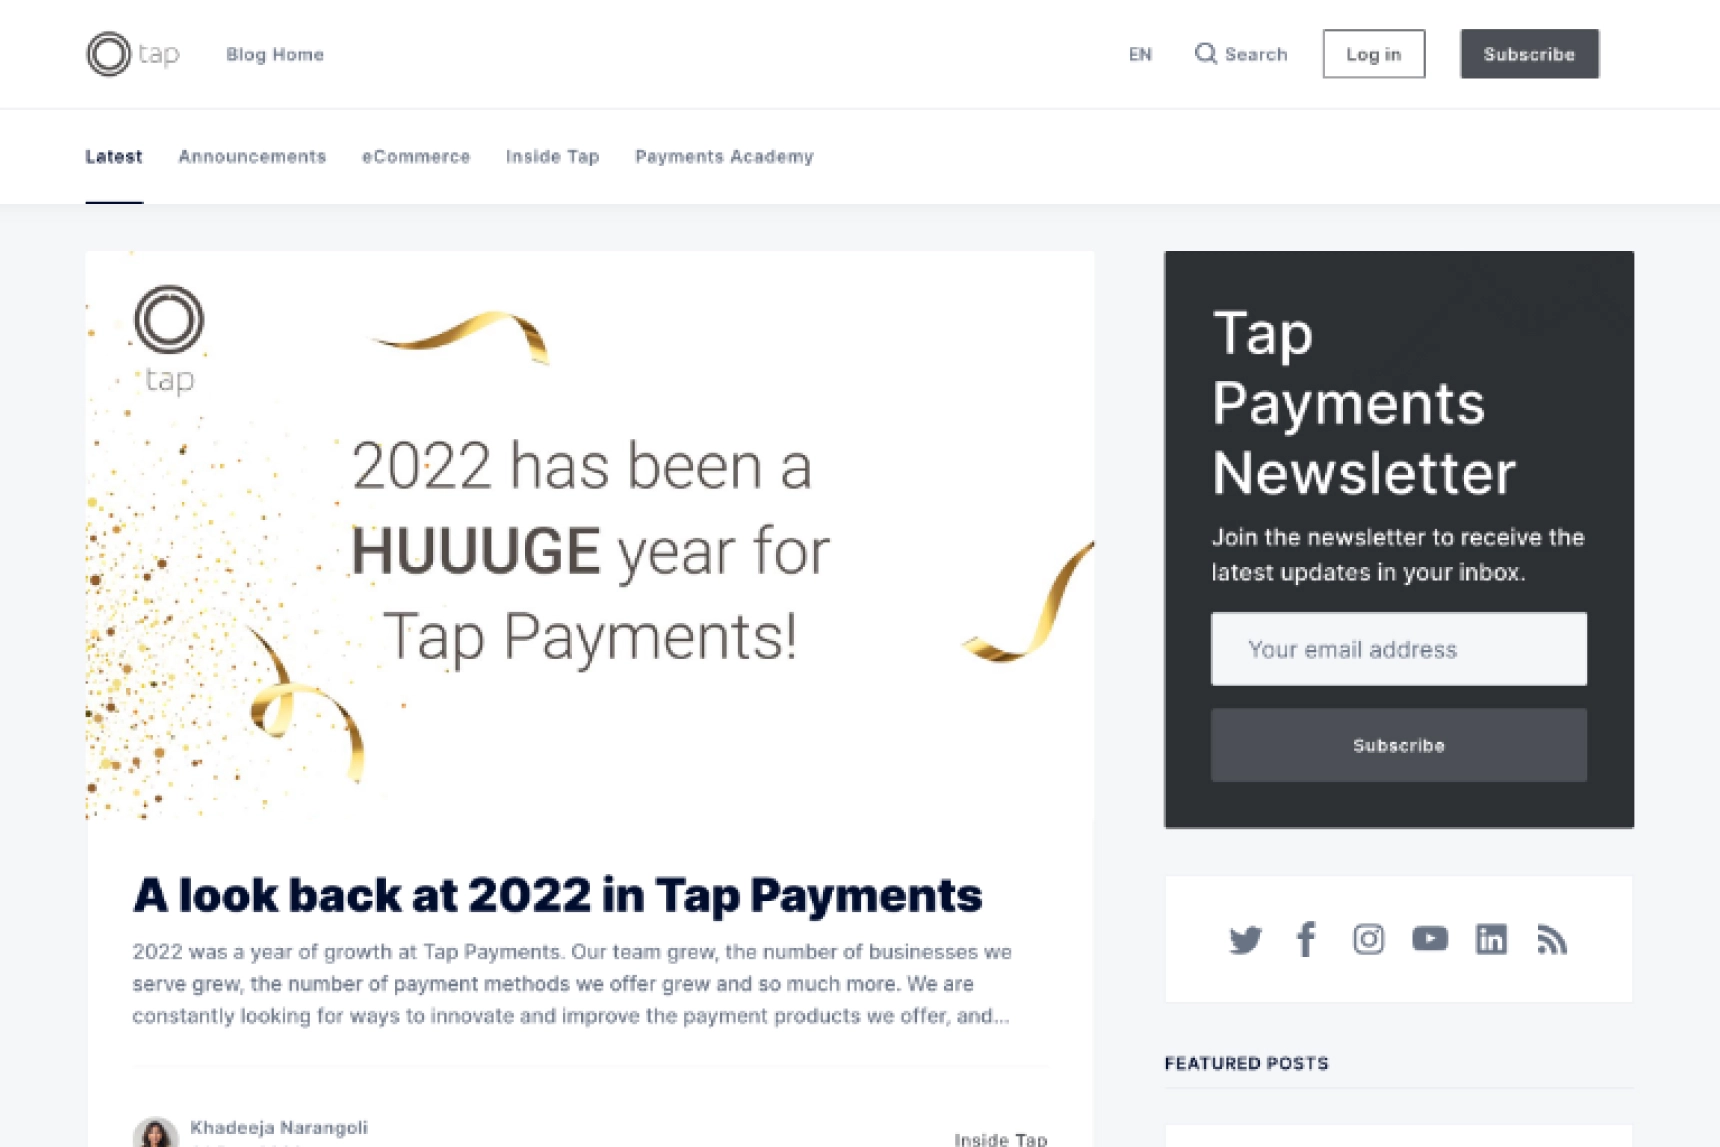 Tap Payments